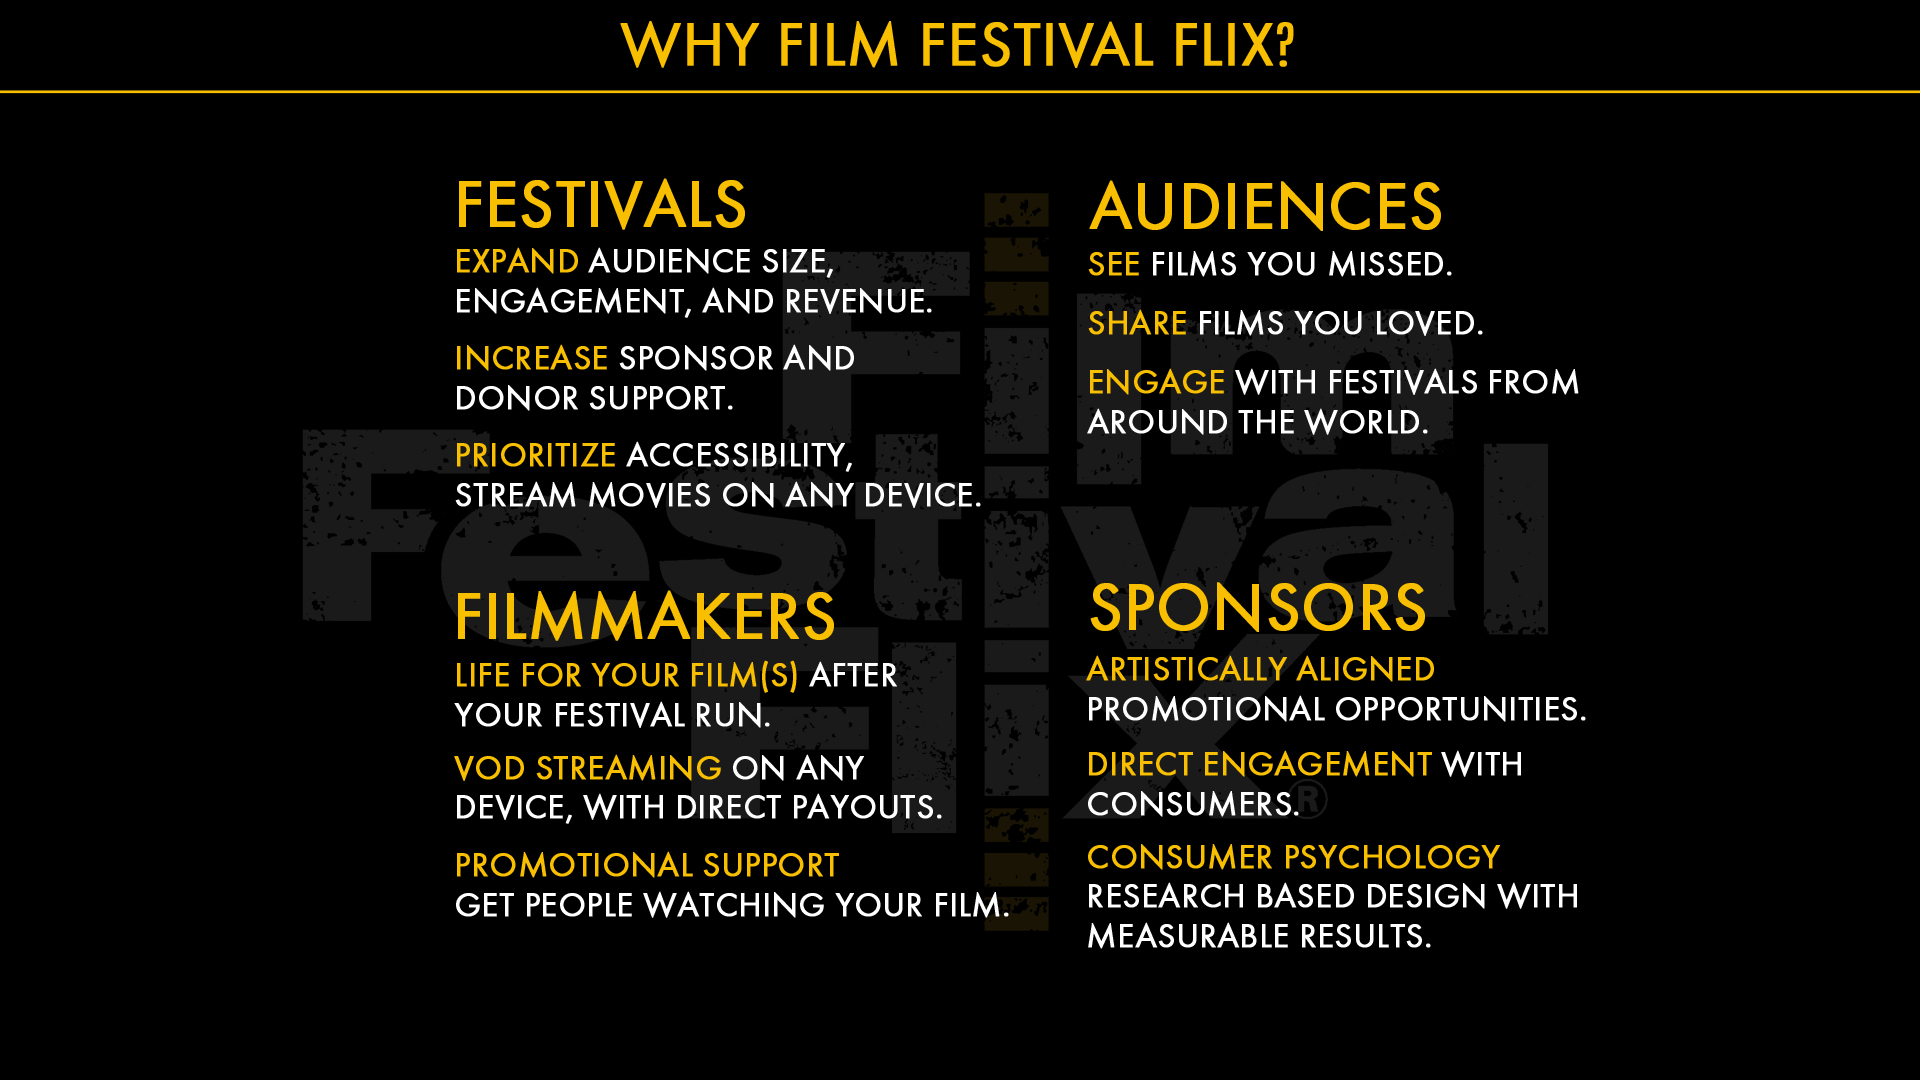 Why film Festival flix? Your brand, your artists and your patrons are unique to you. Whether your online festival features indie films - comedy and drama, documentaries, or curated horror movies, whatever festival experience you are creating, Film Festival Flix can help you bring that vision to a reality. With our seamless integration, you can link and incorporate the Film Festival Flix Virtual platform into all of your pre-existing website and branding pages. The FFF team provides full-service festival content on-boarding; festival scheduling of film releases and premieres; and box office creation and ticketing – including the ability to have multiple tickets/ticketing packages, donation options and voucher/discount coupons for VIP patrons, filmmakers, and marketing/ affiliate partners. Our team of professionals will help guide you through the process to make sure you can manage your festival smoothly as possible, by offering training and support. As well as marketing promotion, direct brand promotion, and additional support. We even give you 24/7 access to real-time sales reporting and analytics. We are here to deliver a streamlined and hassle-free virtual event experience.